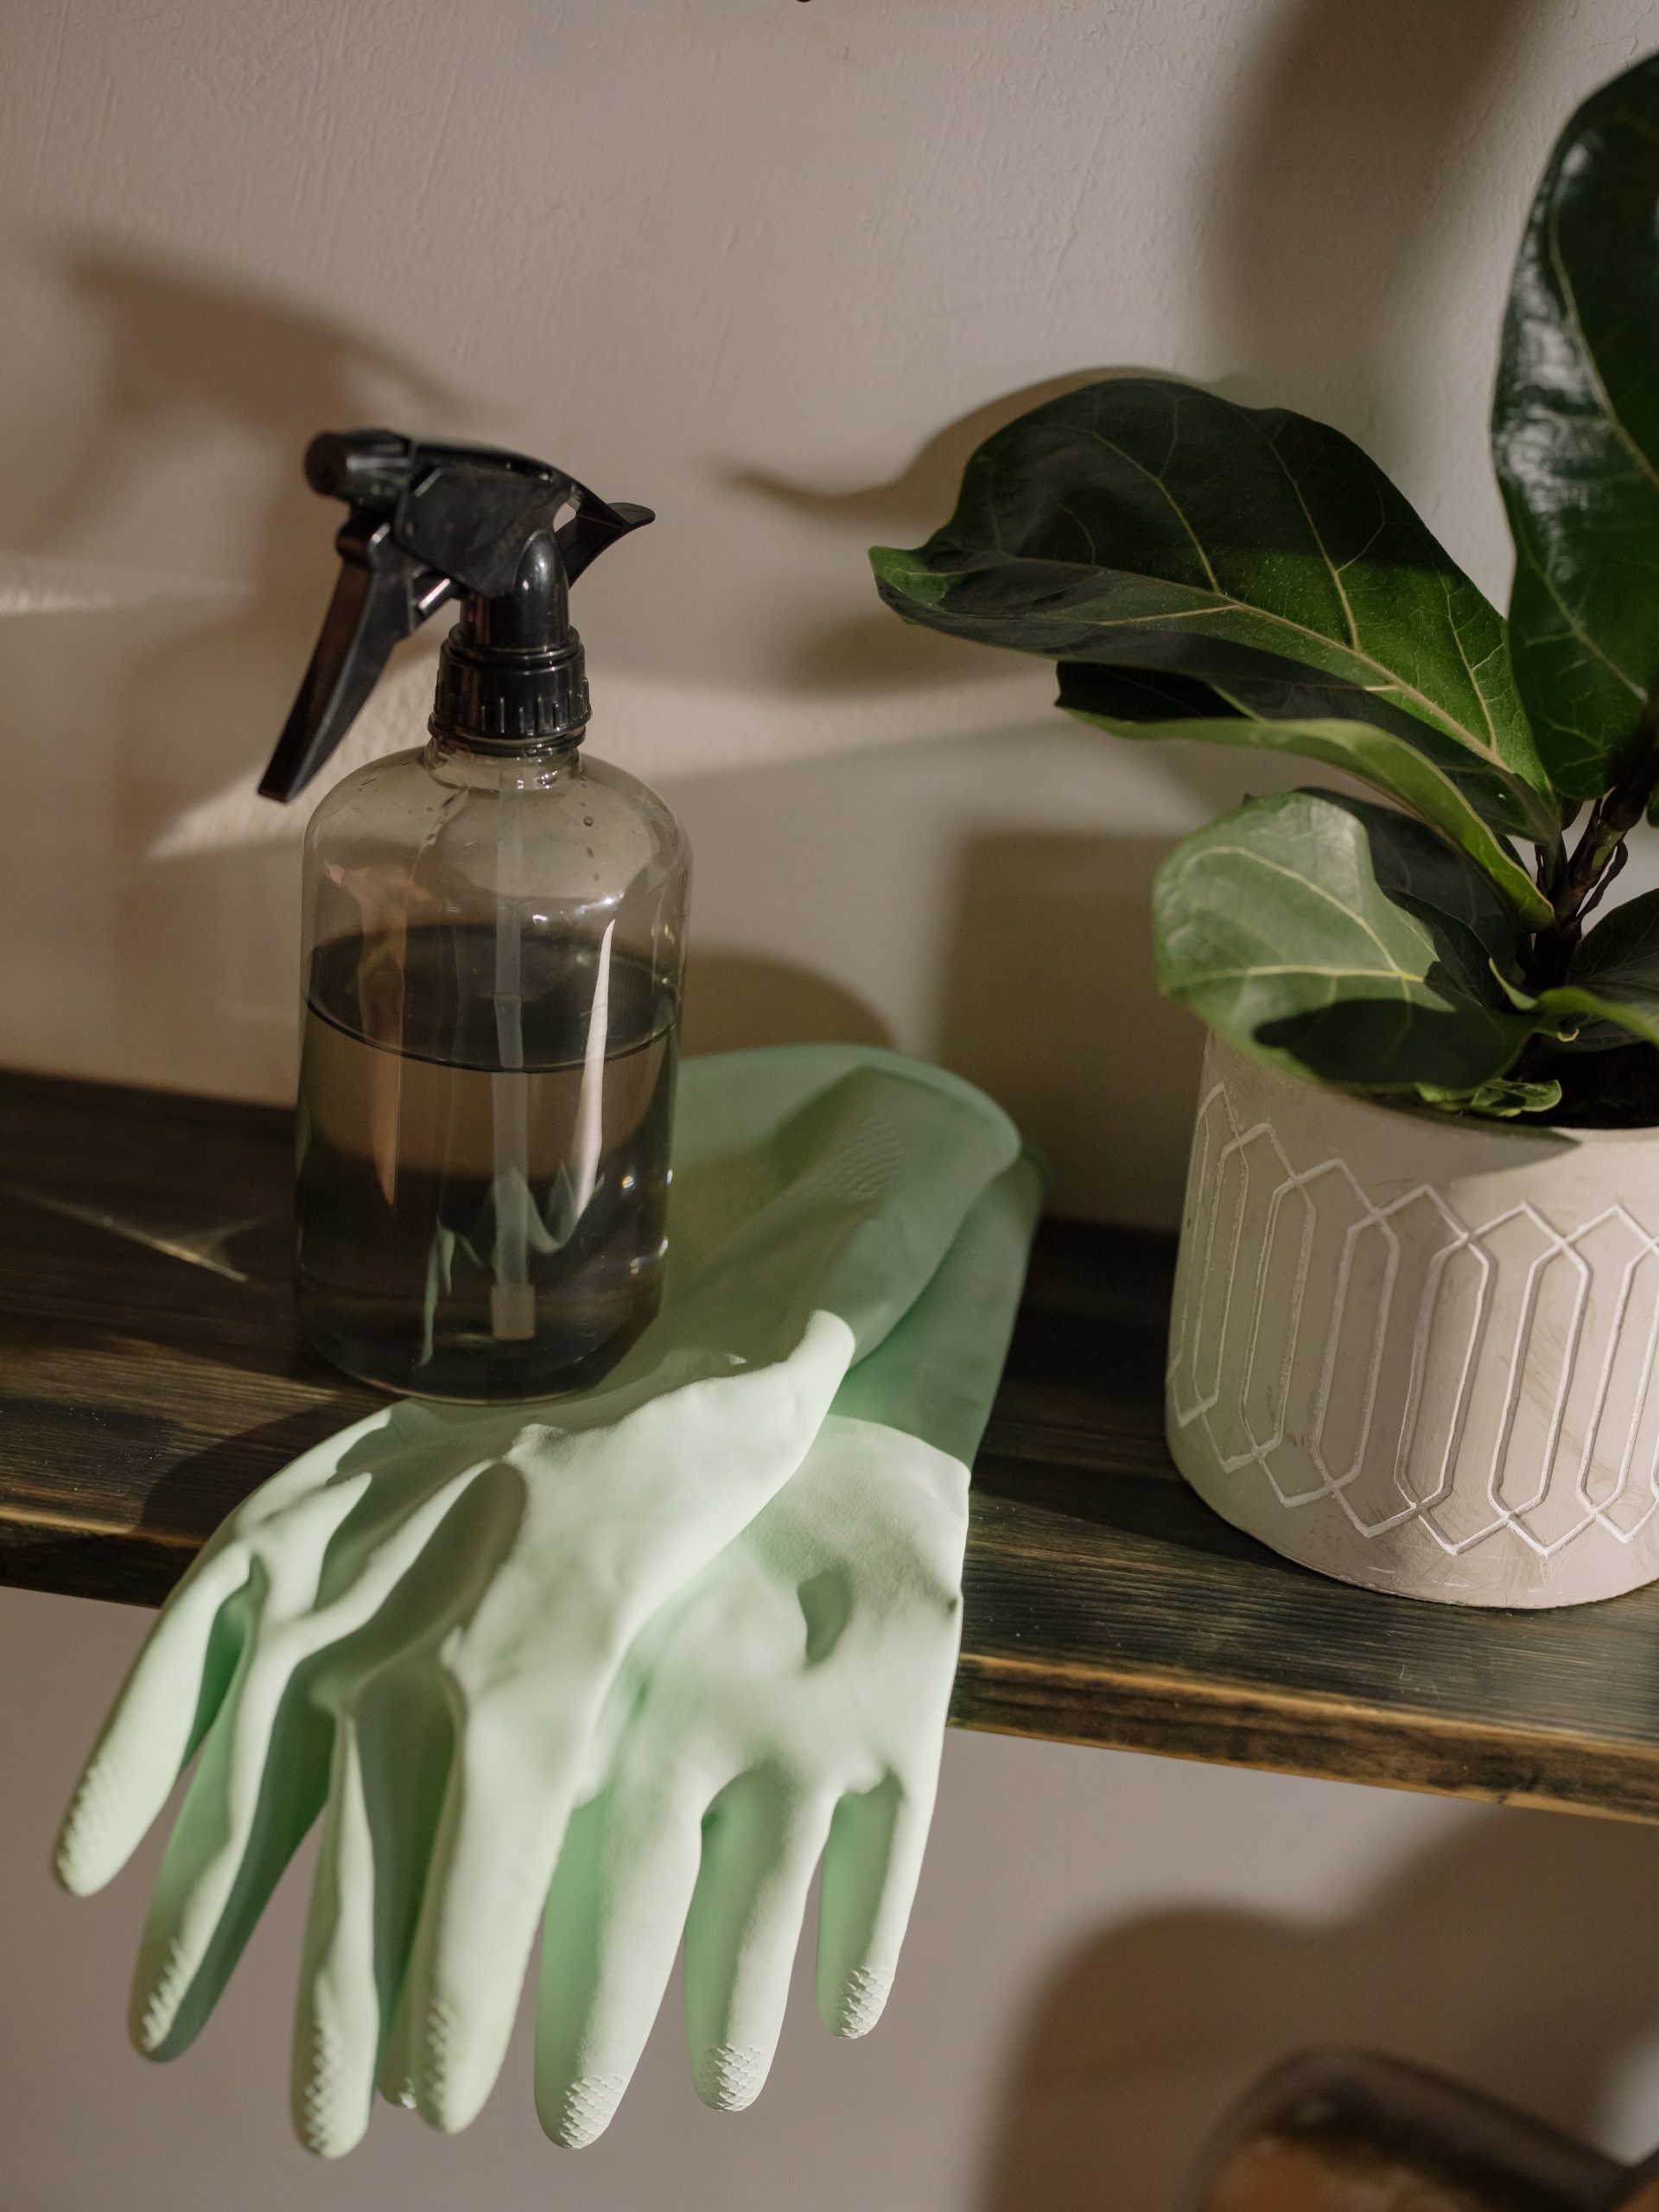 spring cleaning rubber gloves rubber plant spray bottle